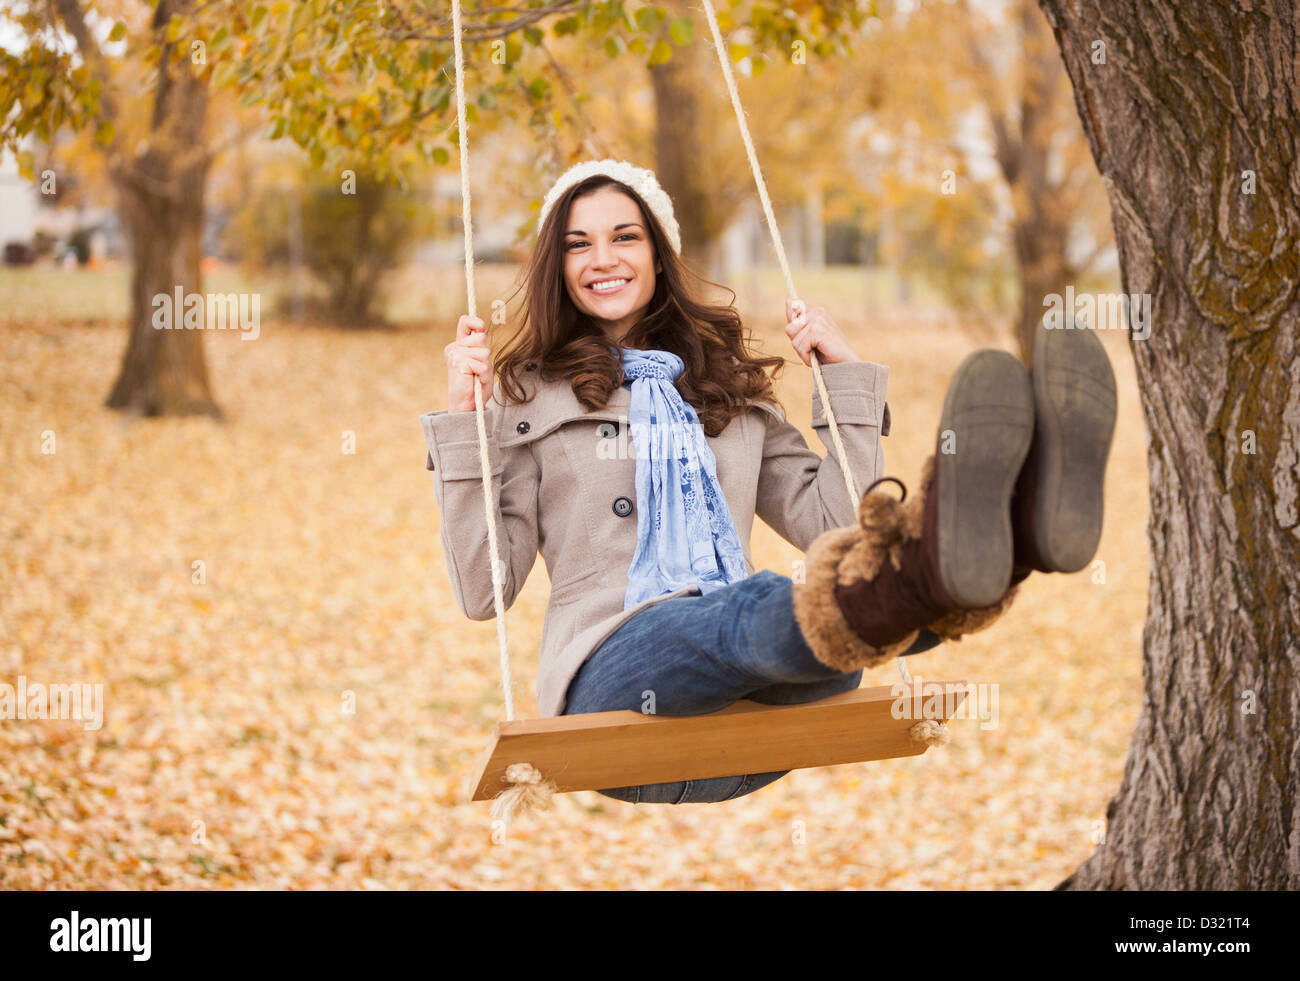 Caucasian woman sitting on swing in autumn leaves Stock Photo